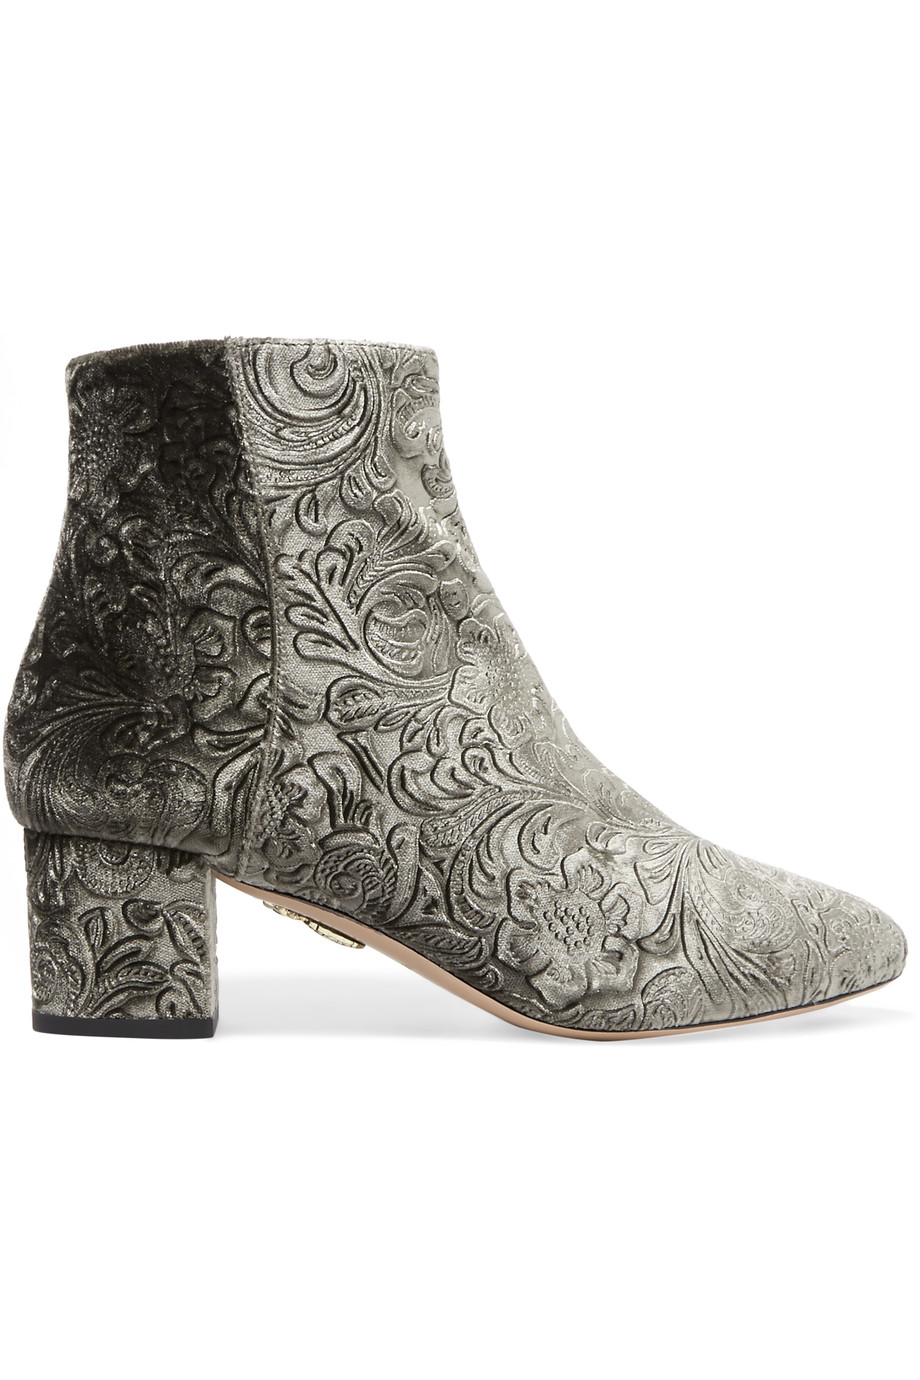 net ankle boots